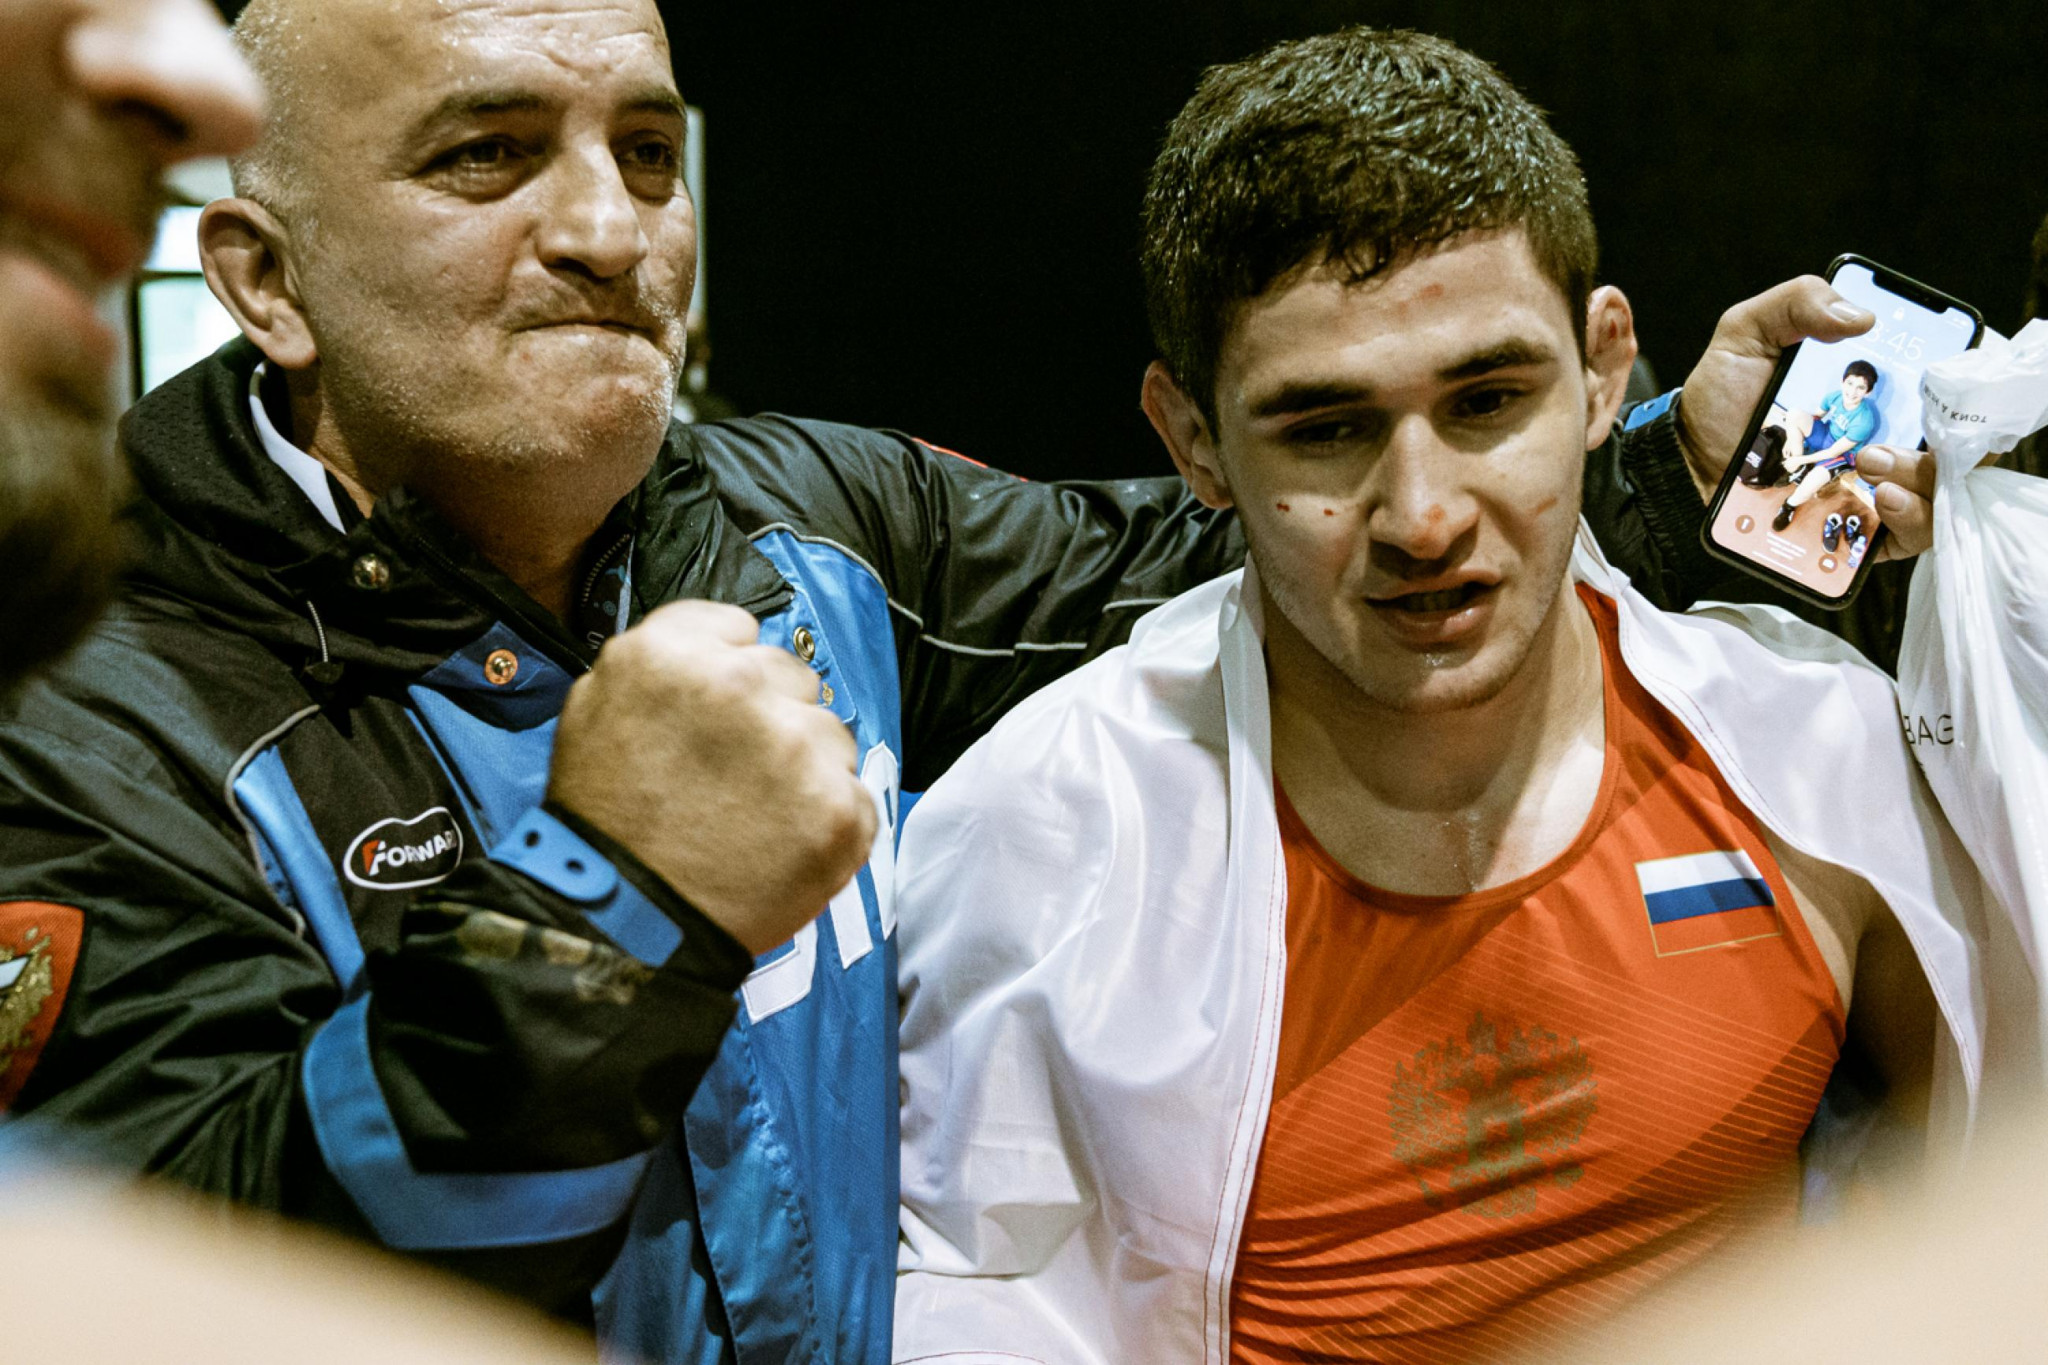 Chermen Valiev won the crucial gold for Russia as they pipped Iran to the freestyle wrestling team gold ©UWW